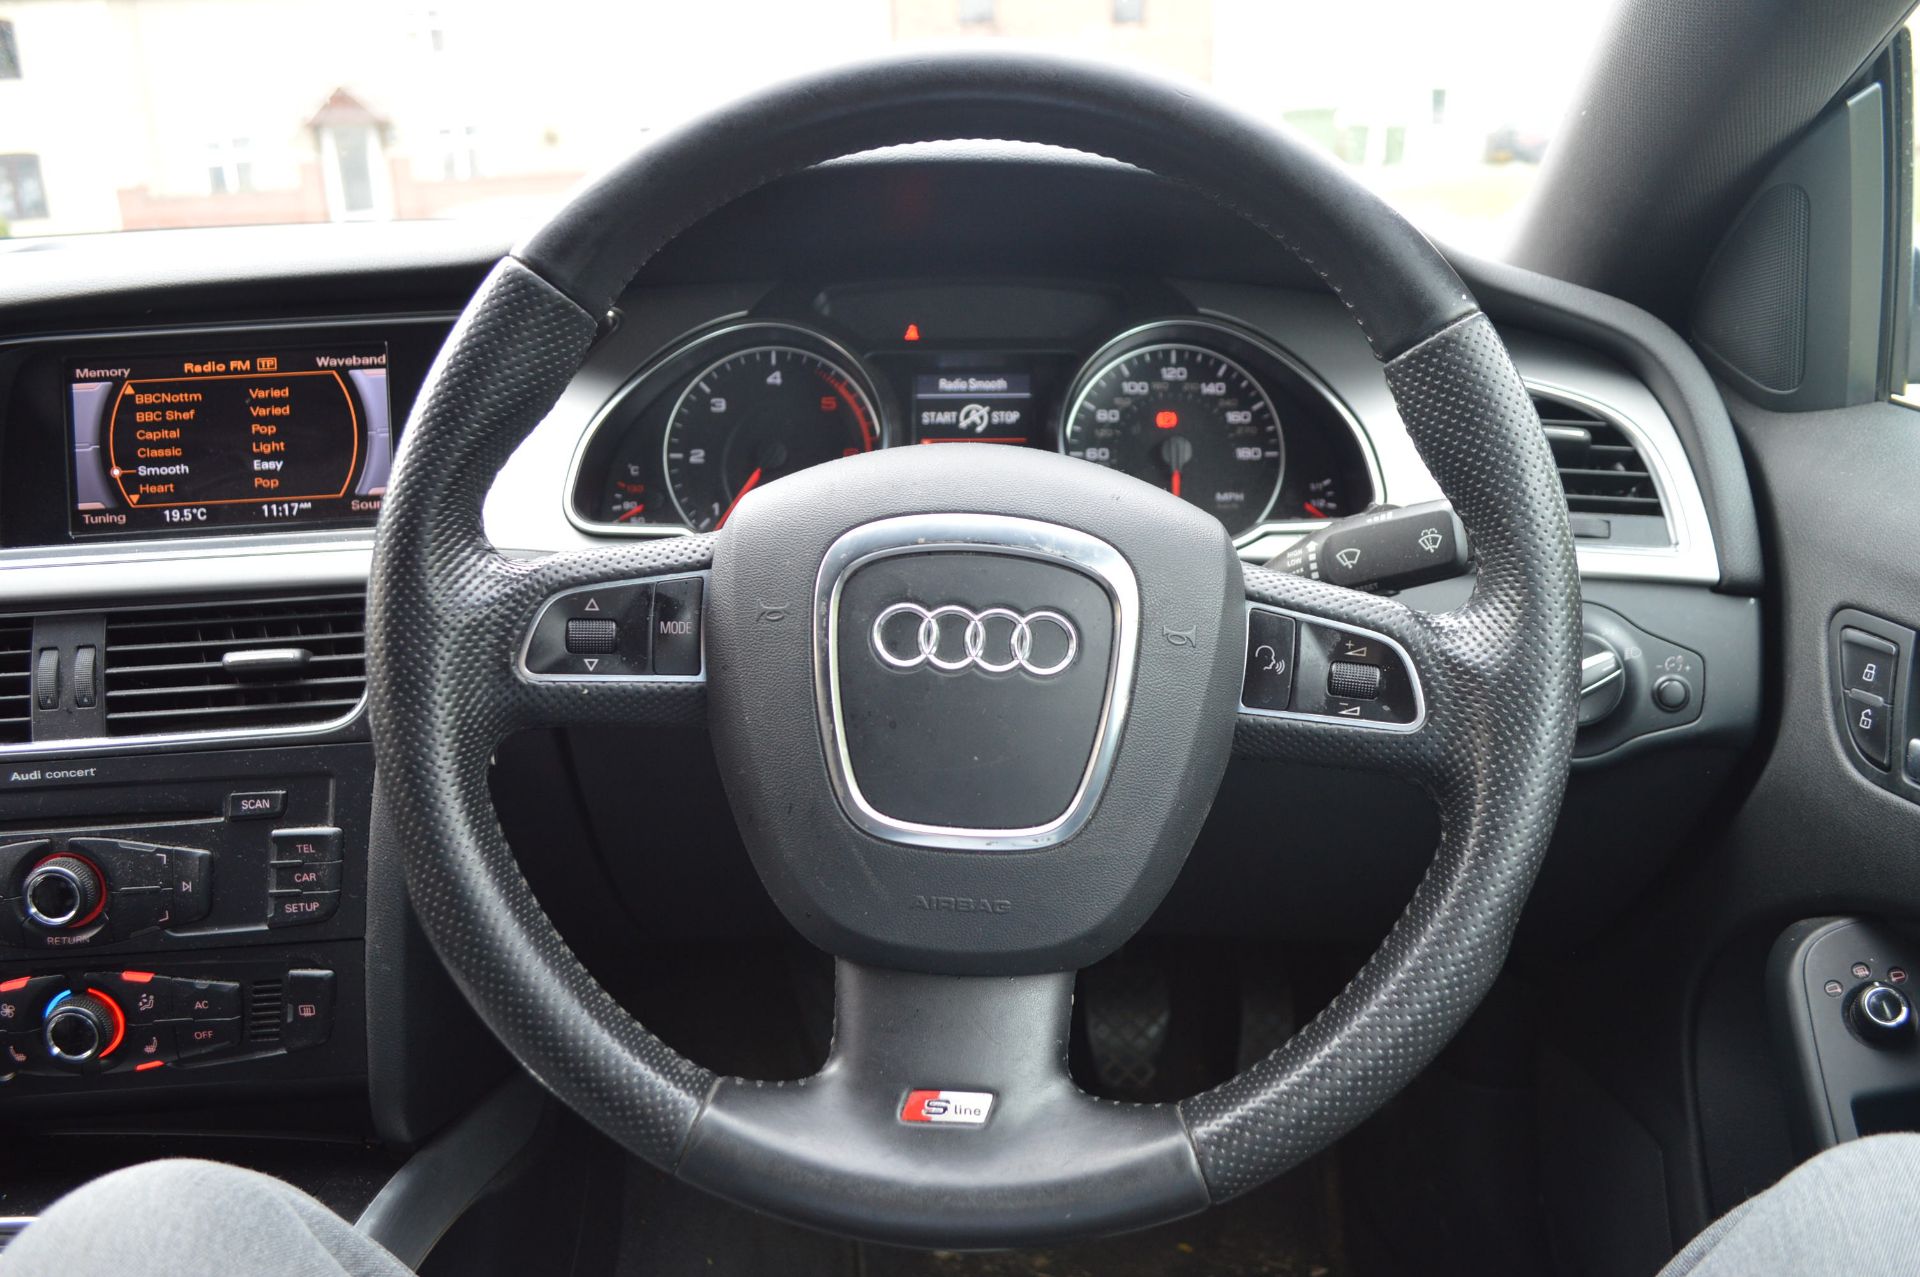 2011/11 REG AUDI A5 S LINE TDI, SERVICE HISTORY, 4 FORMER KEEPERS *NO VAT* - Image 13 of 15